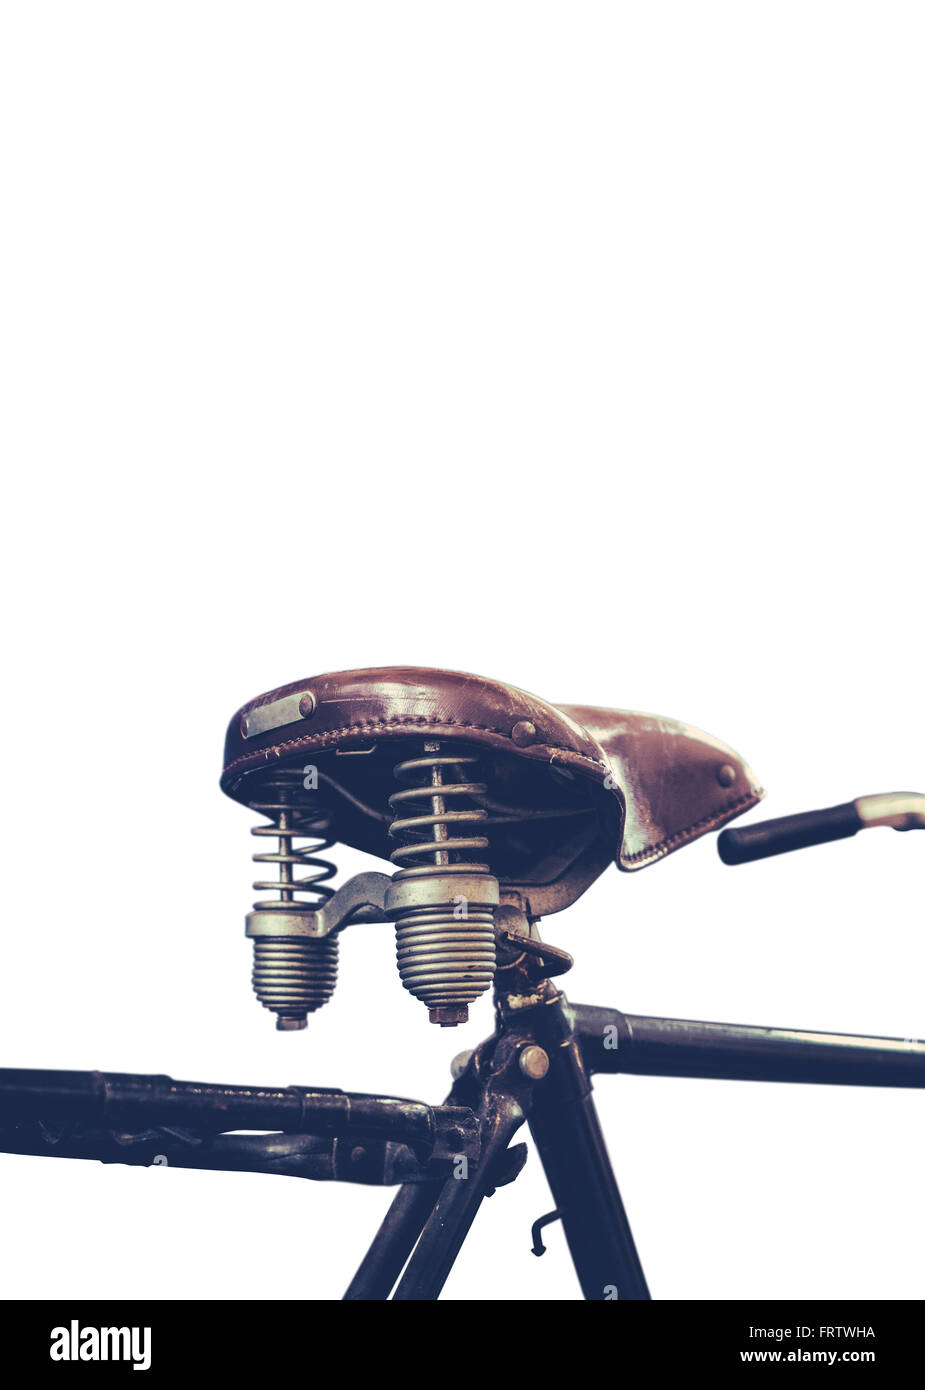 Detail Of A Vintage Black Bicycle Saddle And Springs On A White Background Stock Photo